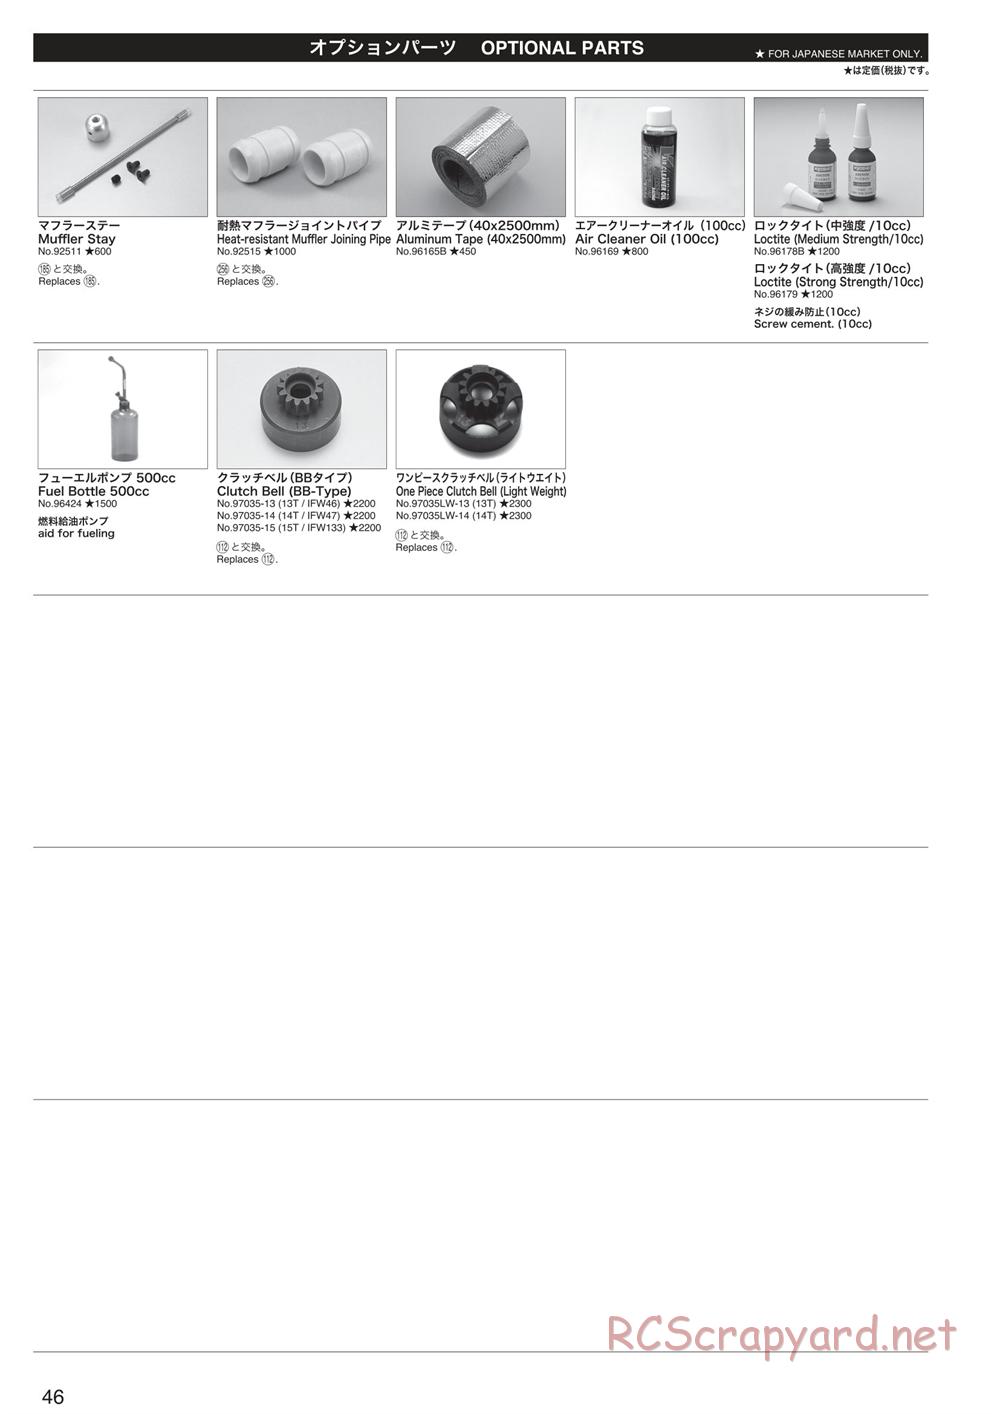 Kyosho - Inferno Neo ST 3.0 - Parts List - Page 5